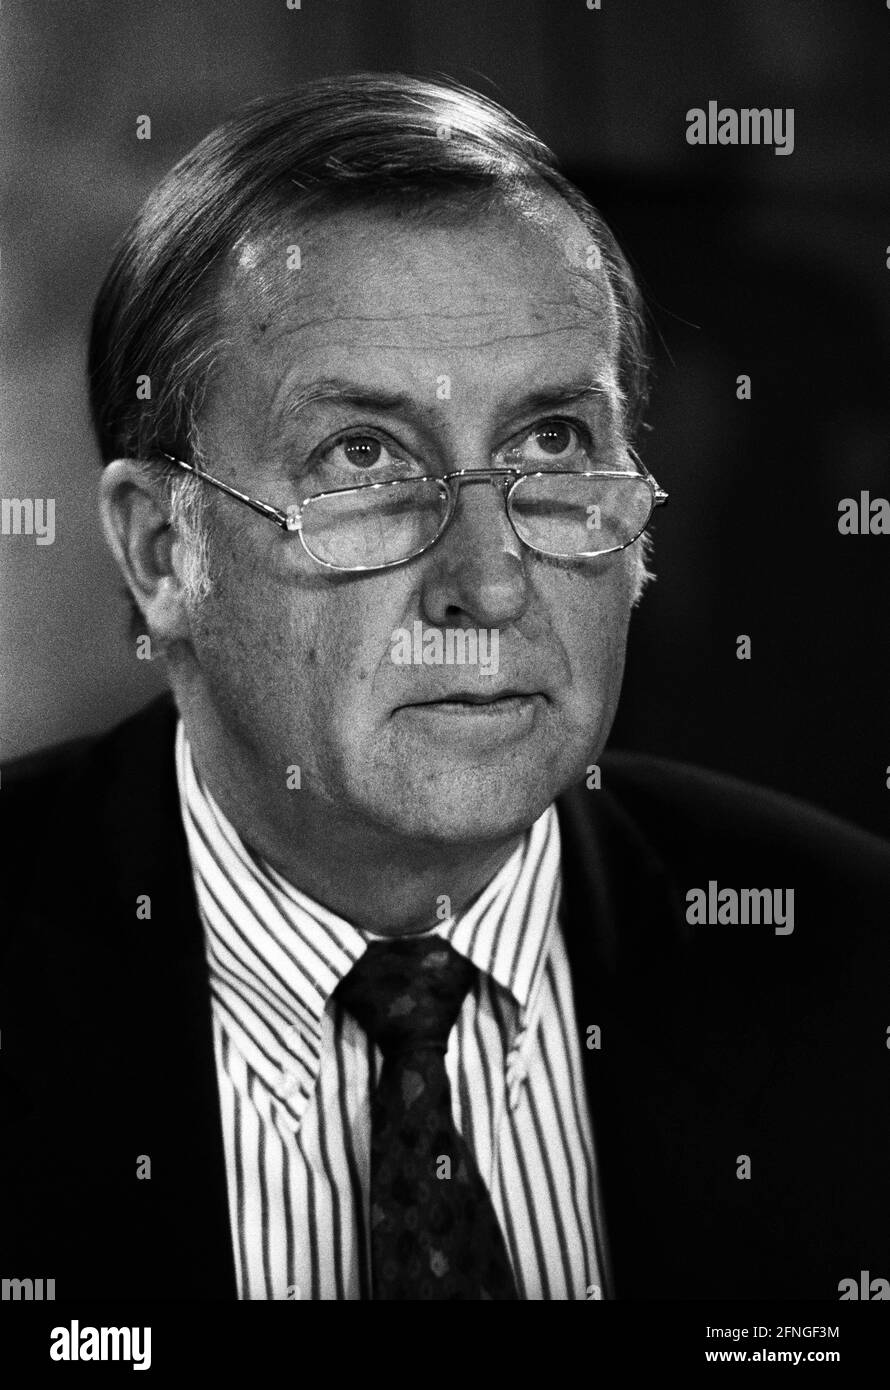 Germany, Bonn, 29.08.1990 Archive-No.: 19-66-01 Meeting of the Minister Presidents in the Federal Chancellery Photo: Detlev Karsten Rohwedder, President of the Treuhand-Anstalt [automated translation] Stock Photo